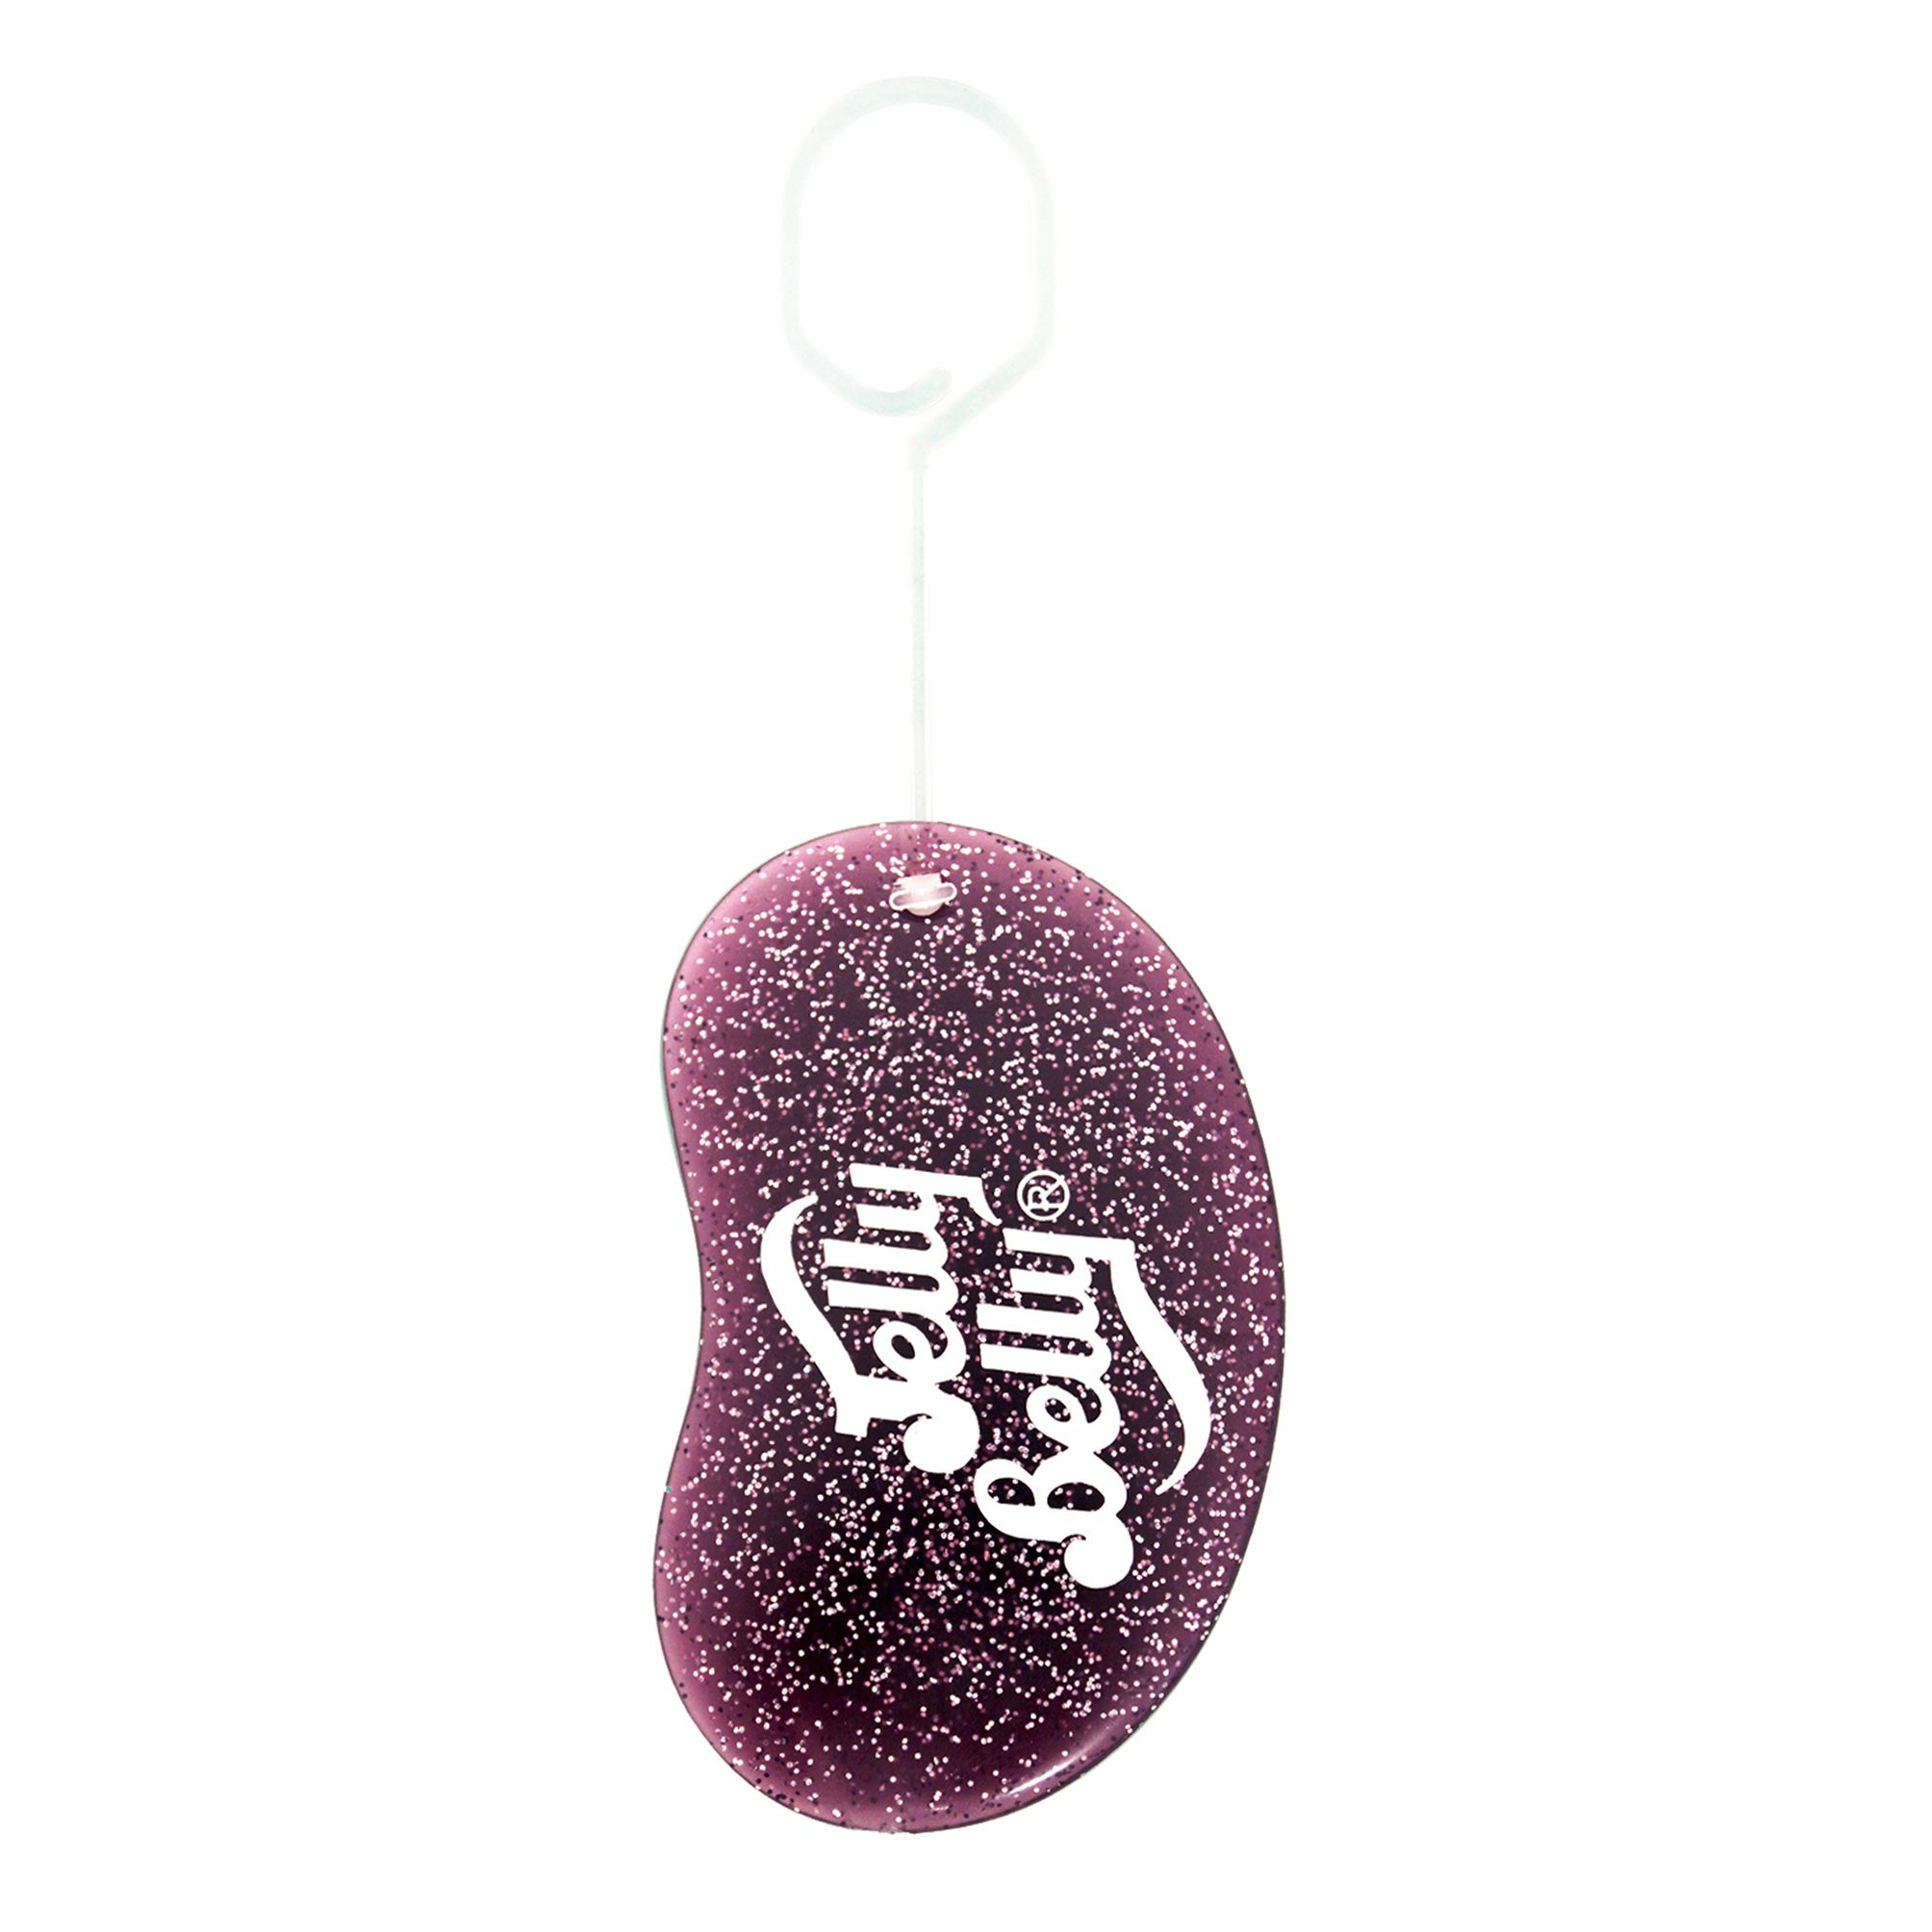 Jelly Belly Island Punch Hanging air freshener